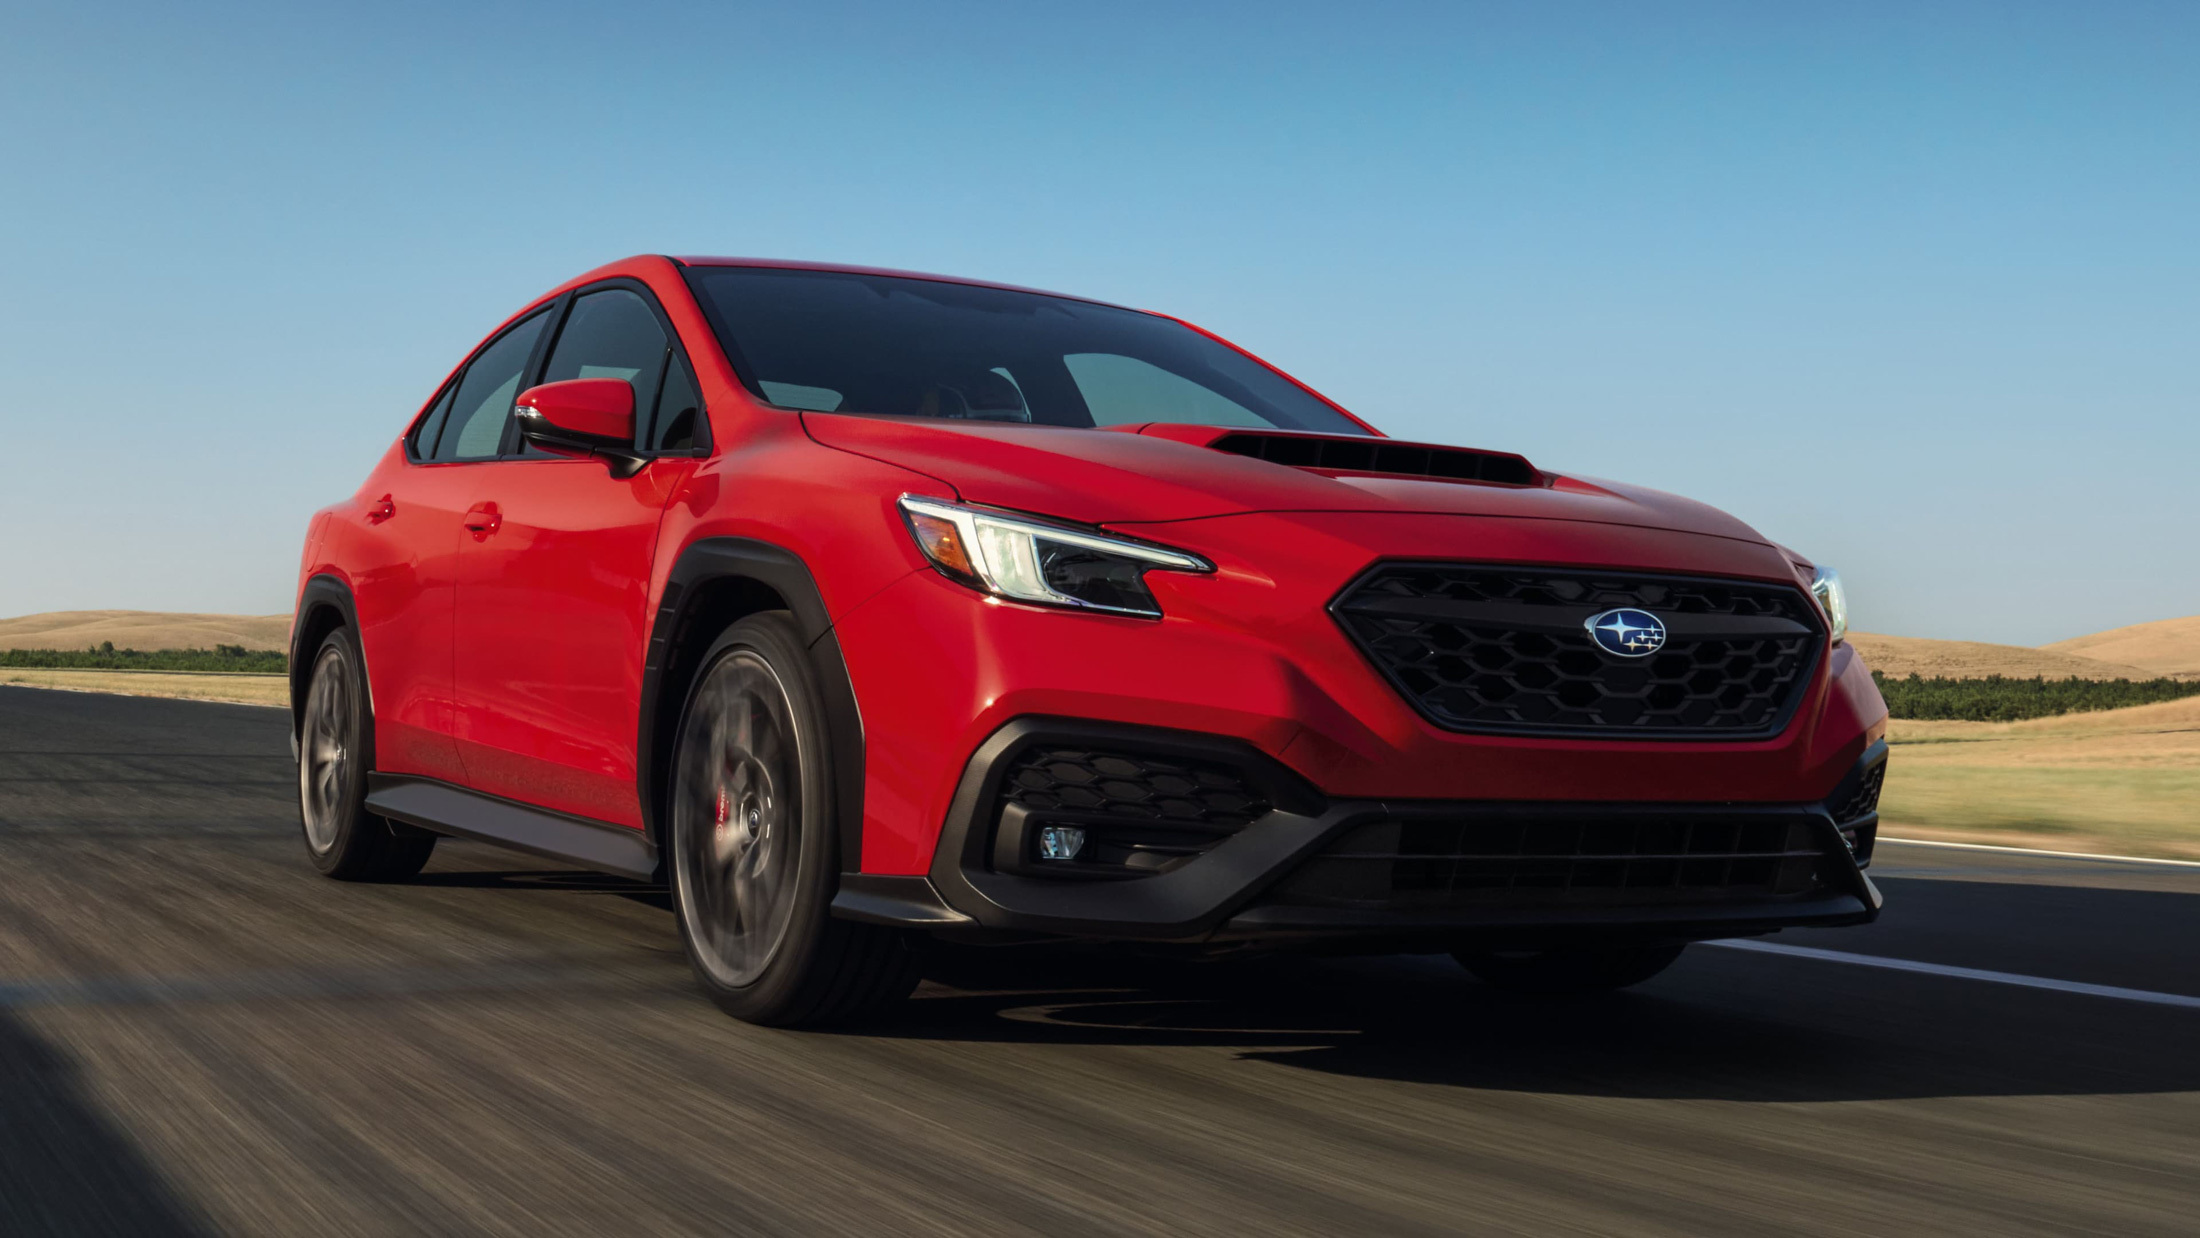 2024 Subaru WRX TR Debuts With Tuned Chassis But Stock 271 HP Motor And